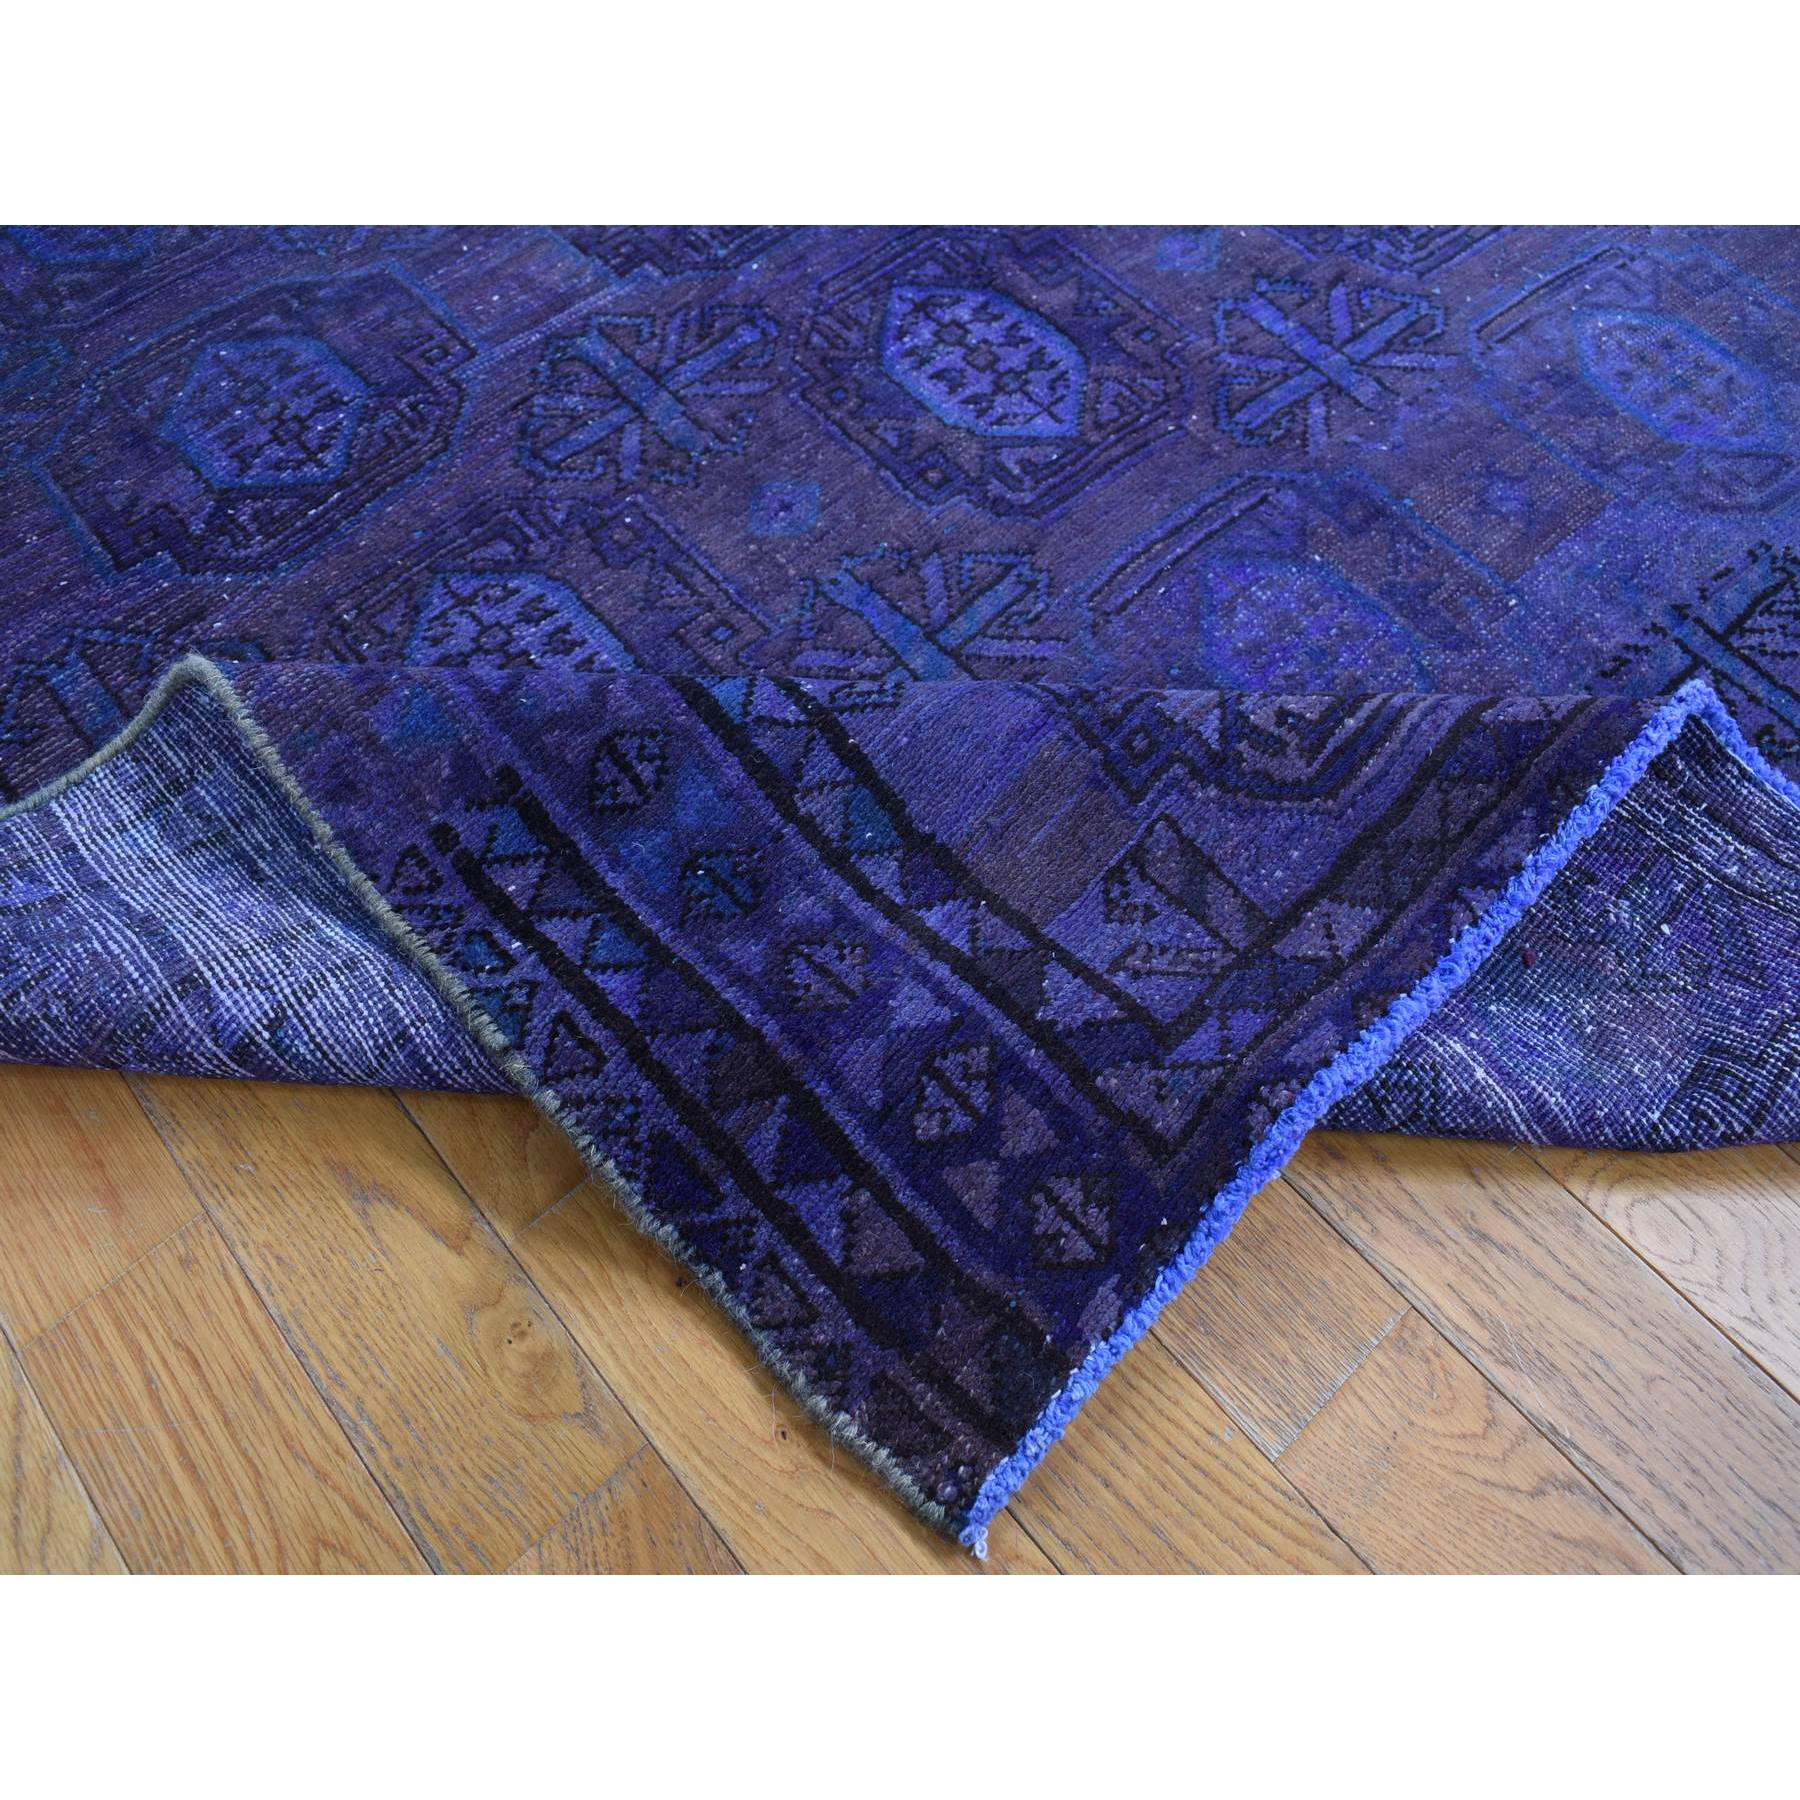  Wool Hand-Knotted Area Rug 4'9